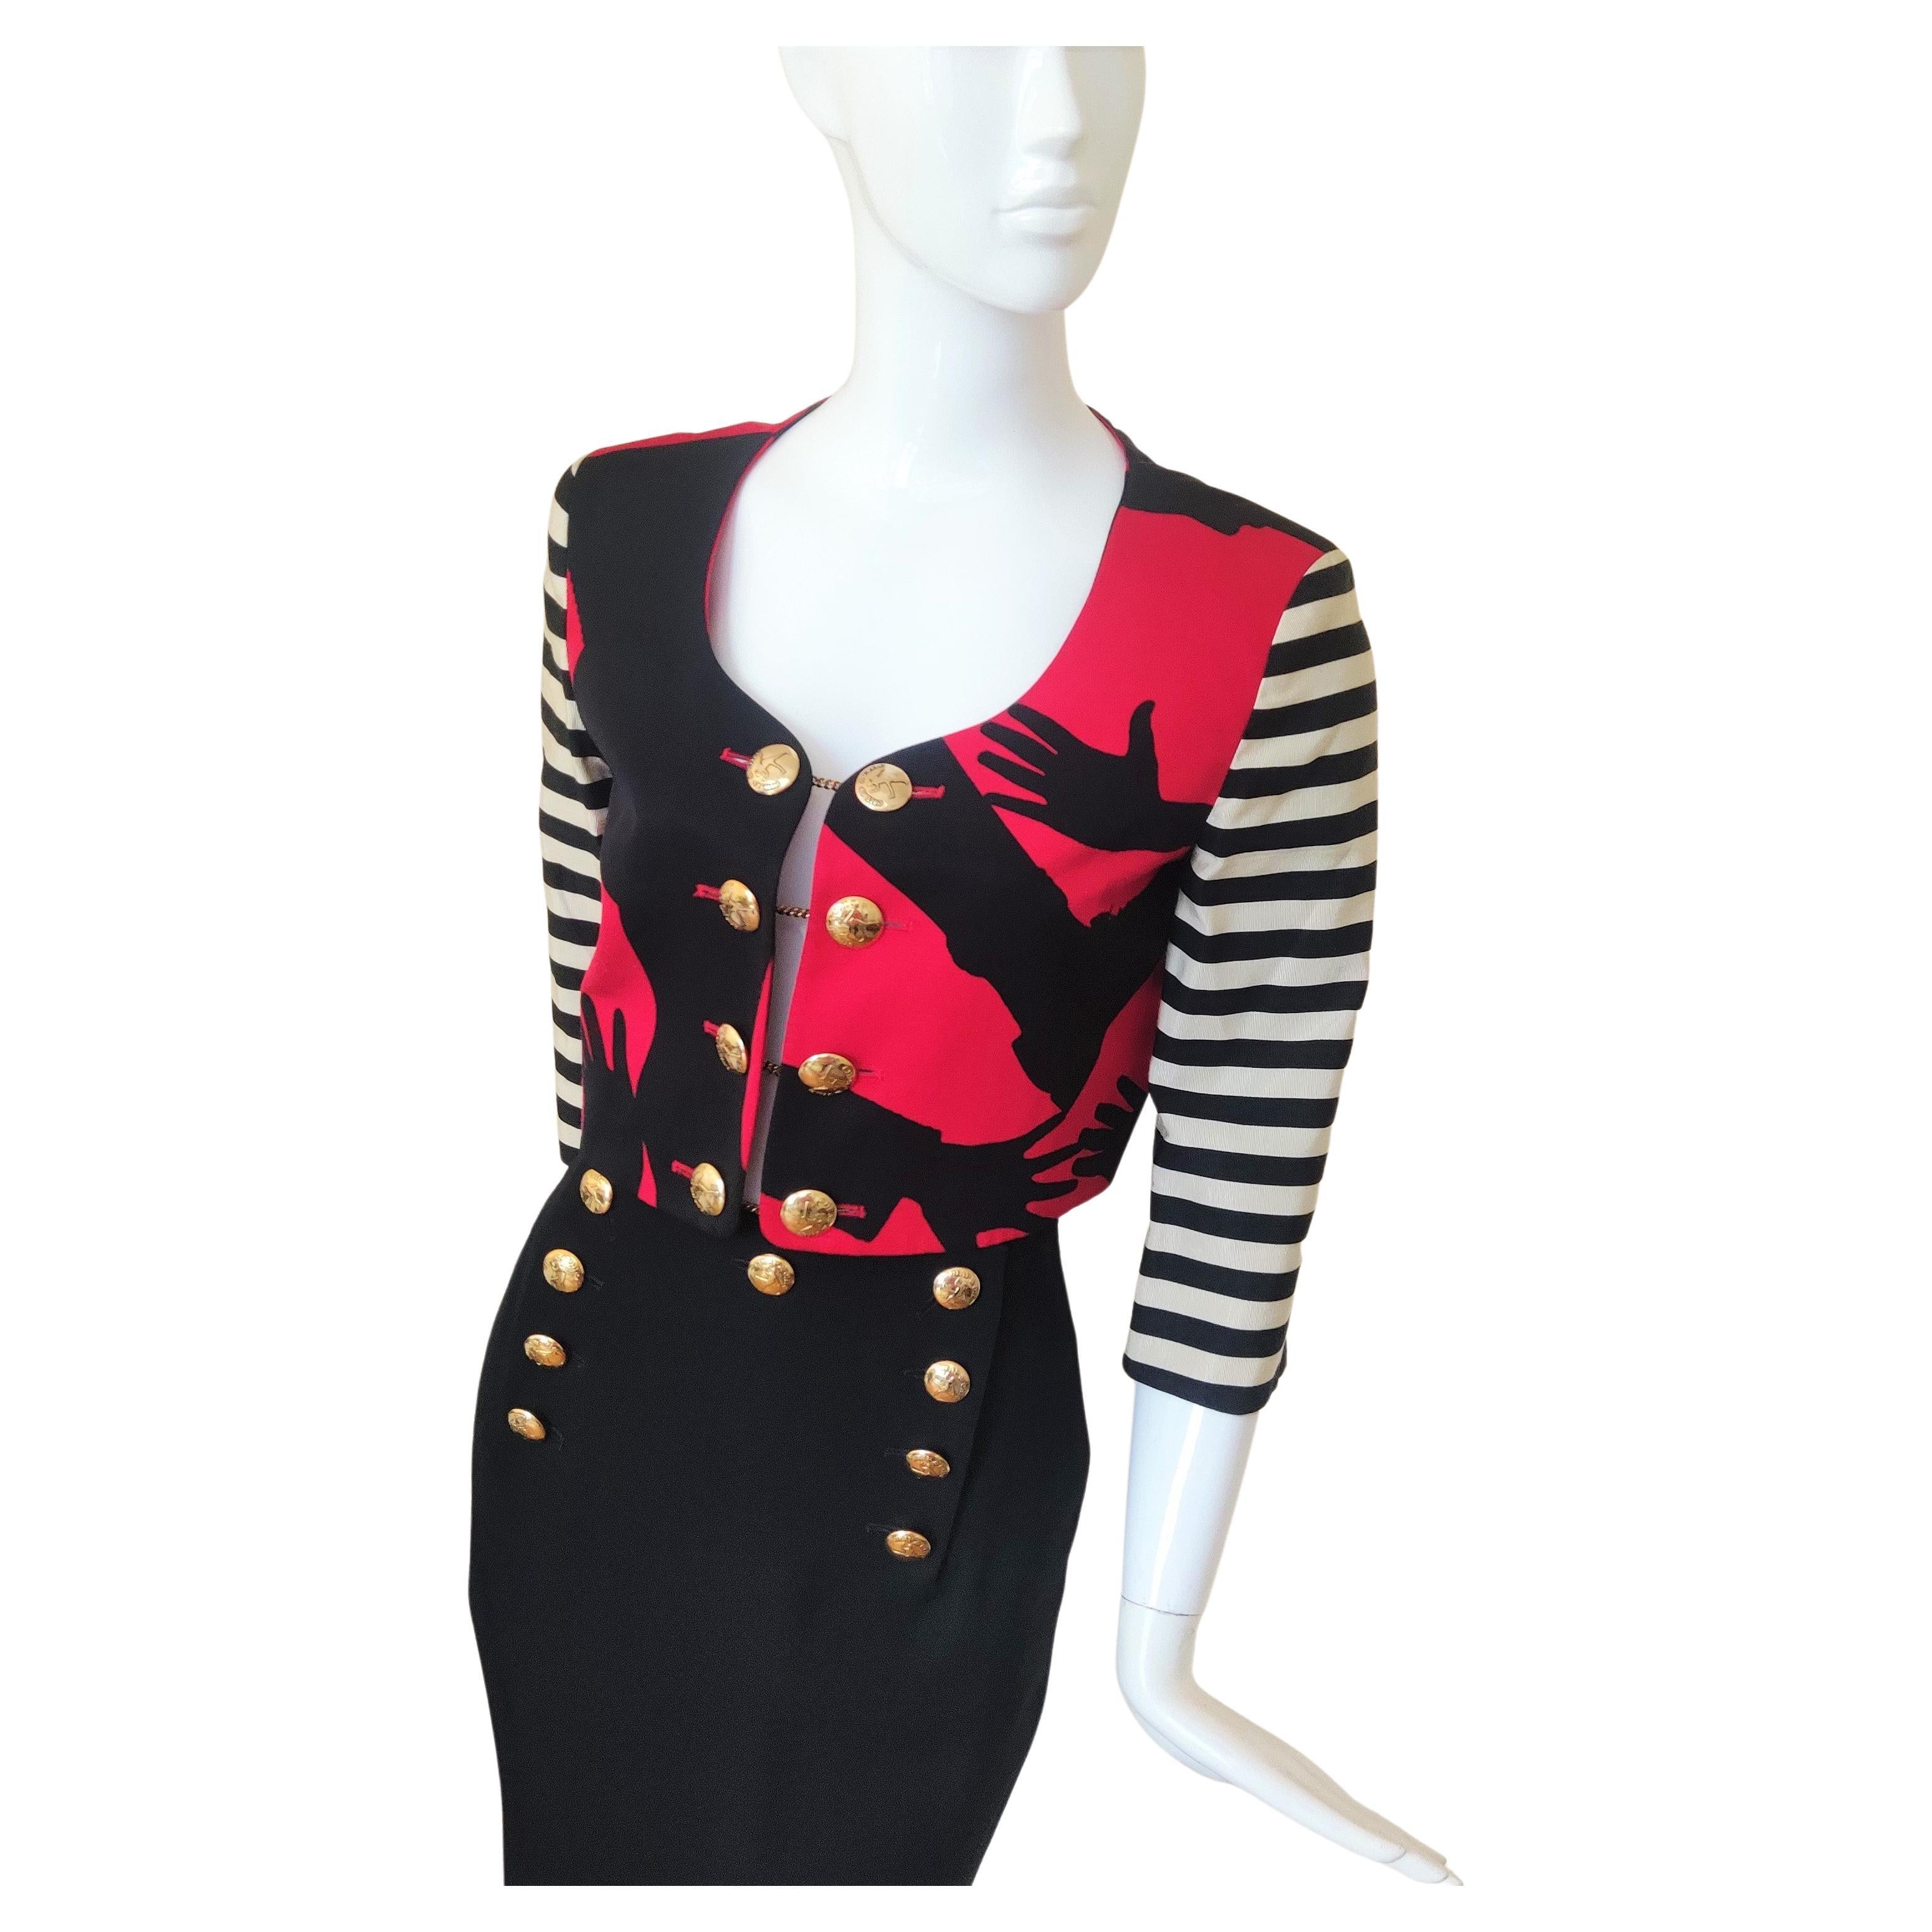 Moschino Cheap and Chic Olive Oyl Popeye Arms Legs Shadow The Nanny Couture Suit